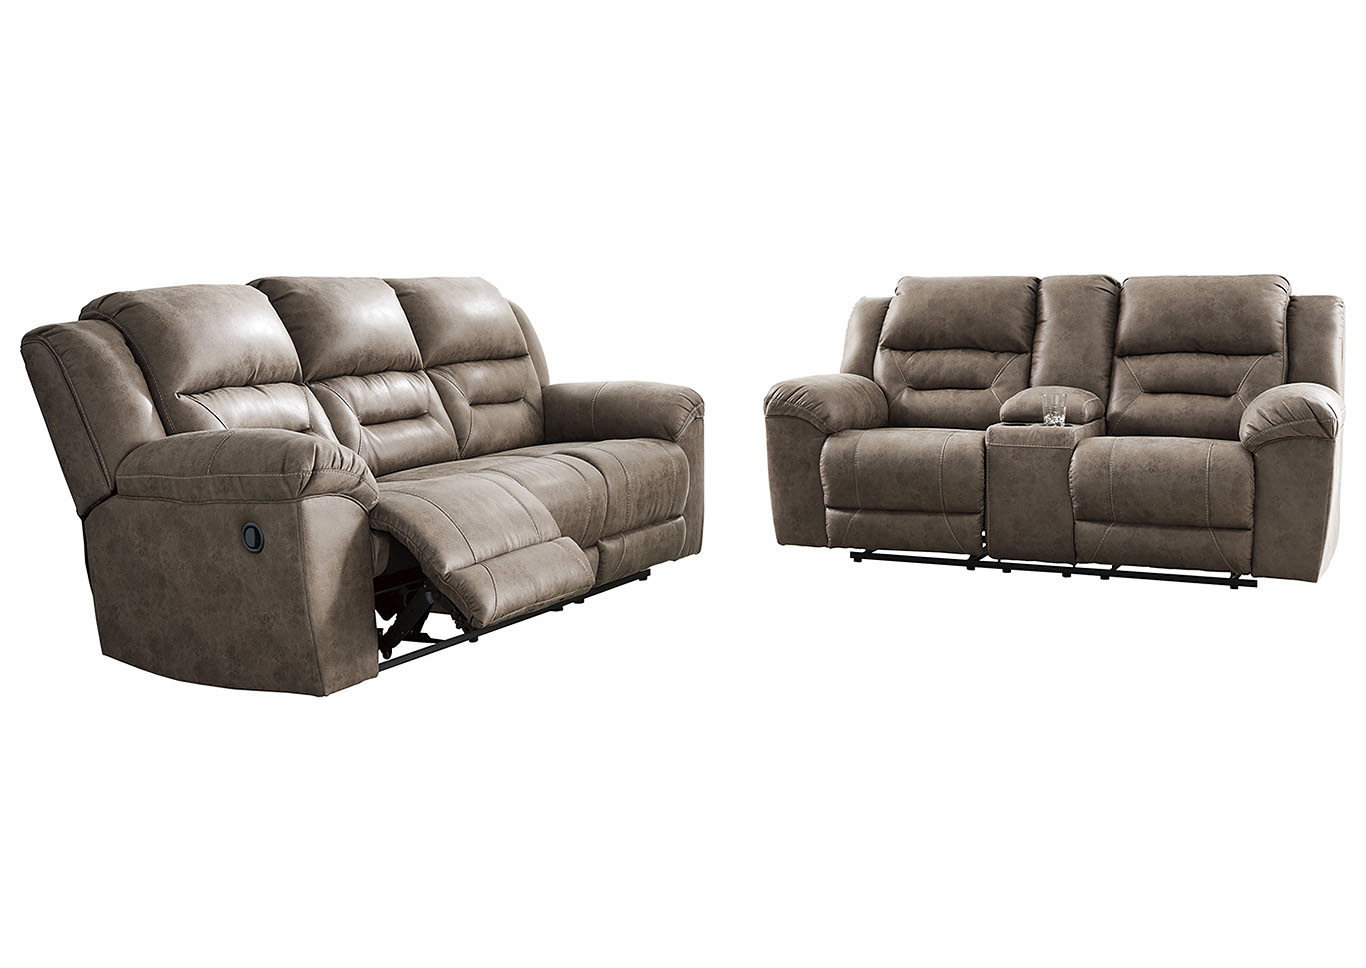 Stoneland Fossil Reclining Sofa And, Best Leather Reclining Sofa And Loveseat